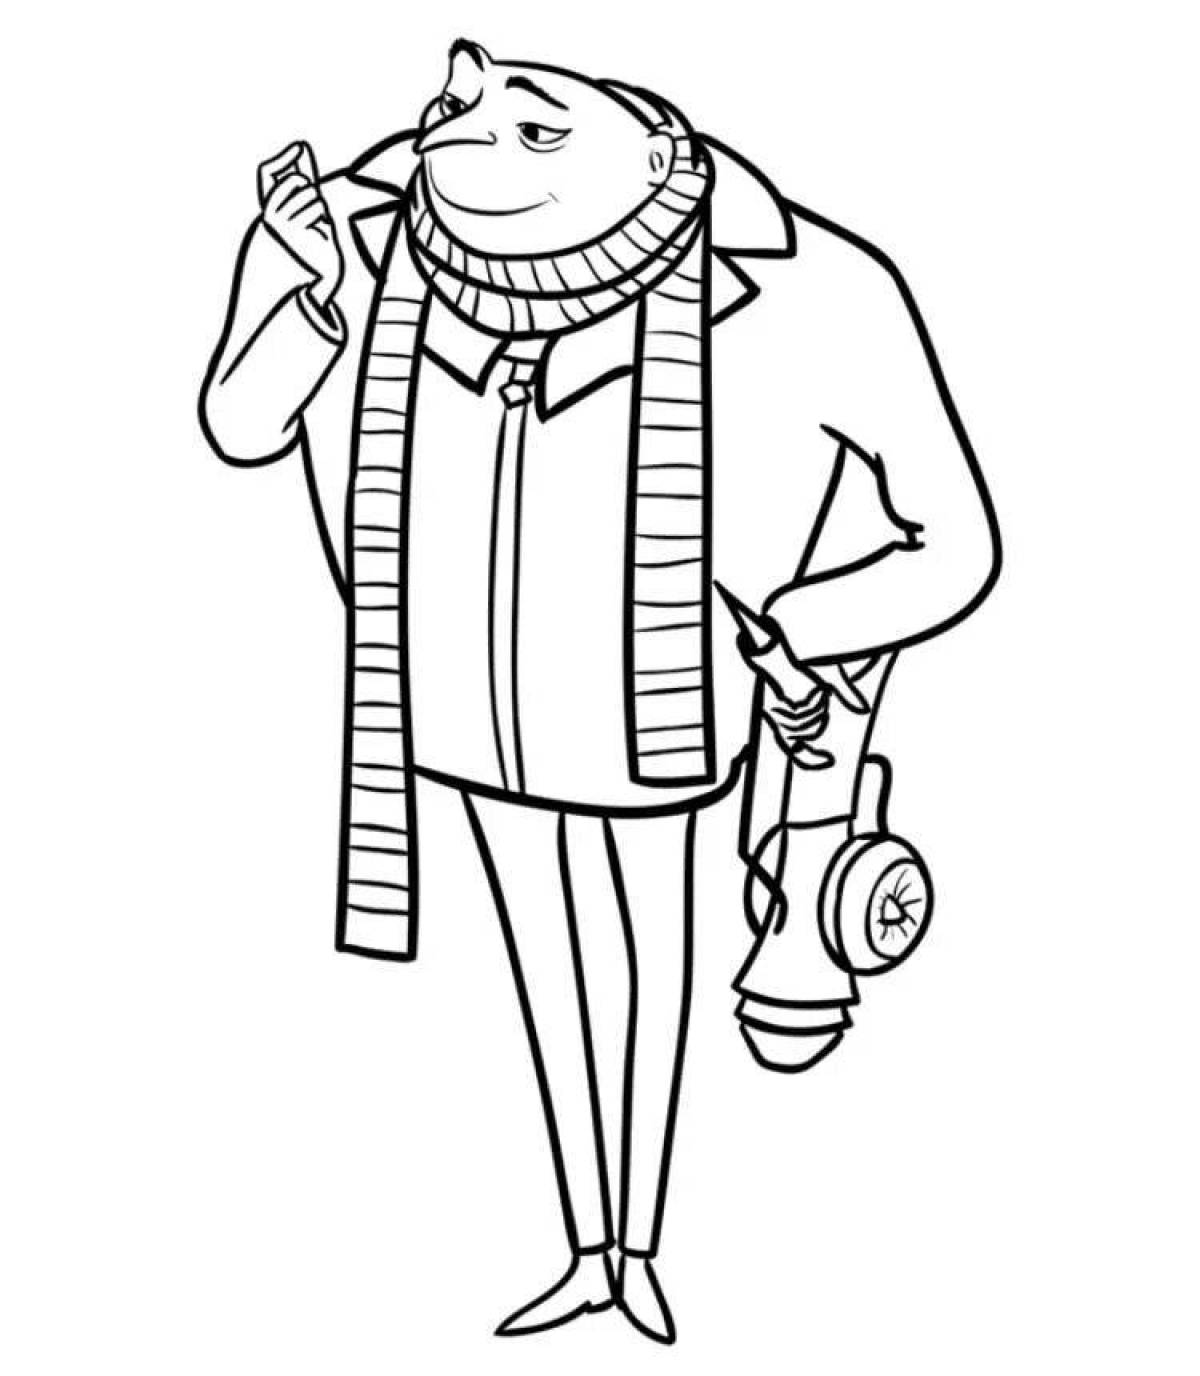 Gru fairy tale coloring page